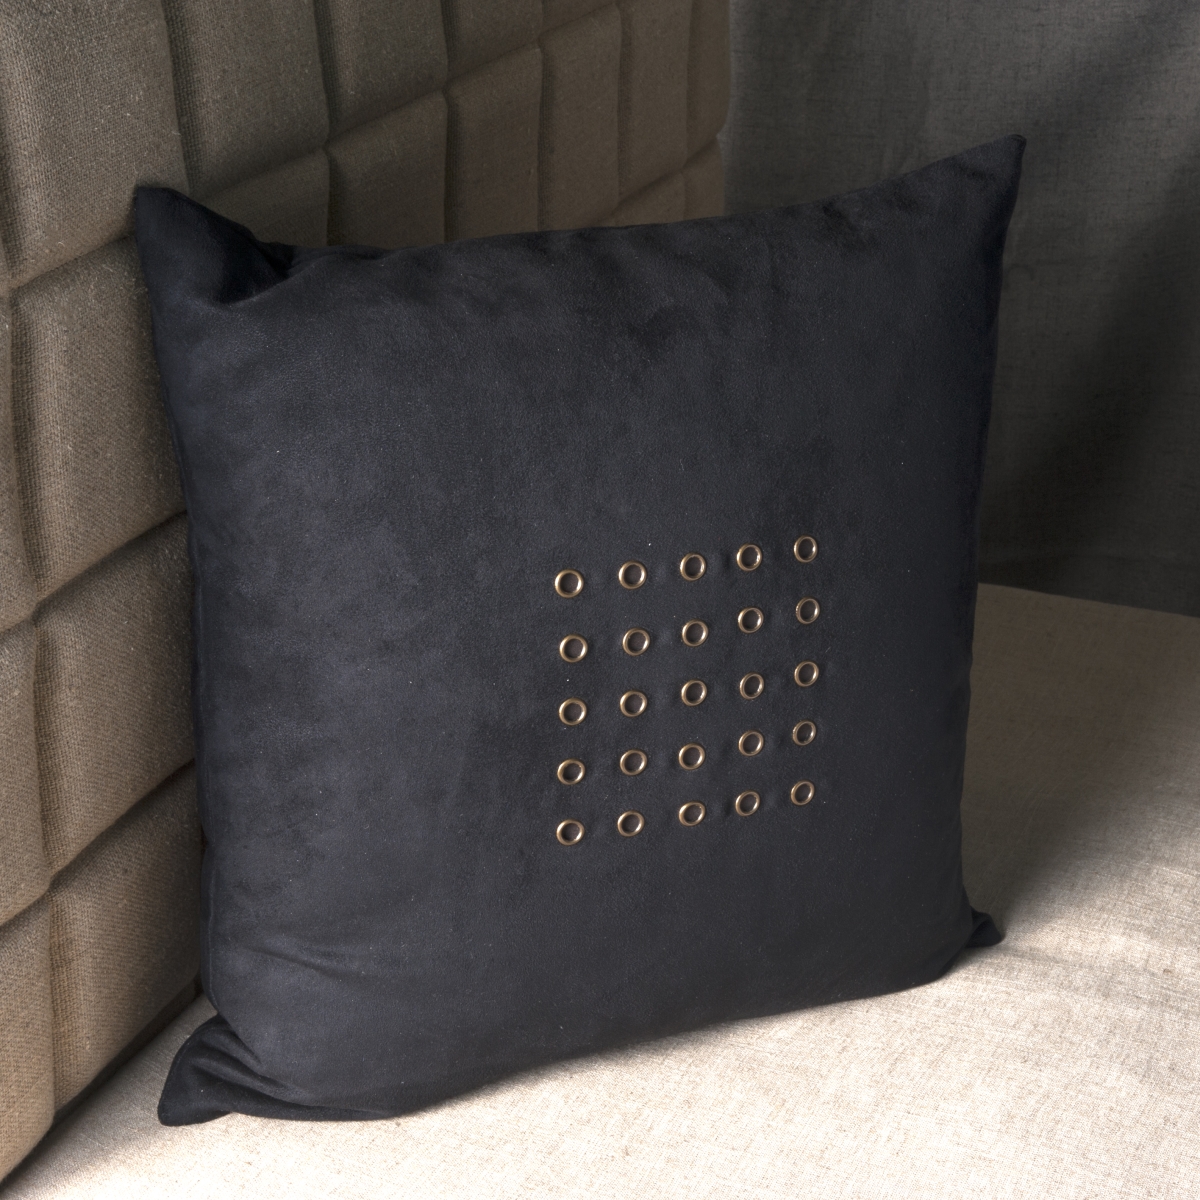 Eah012xxblac27 Centered Grommets Accent On Micro Suede Pillow Black